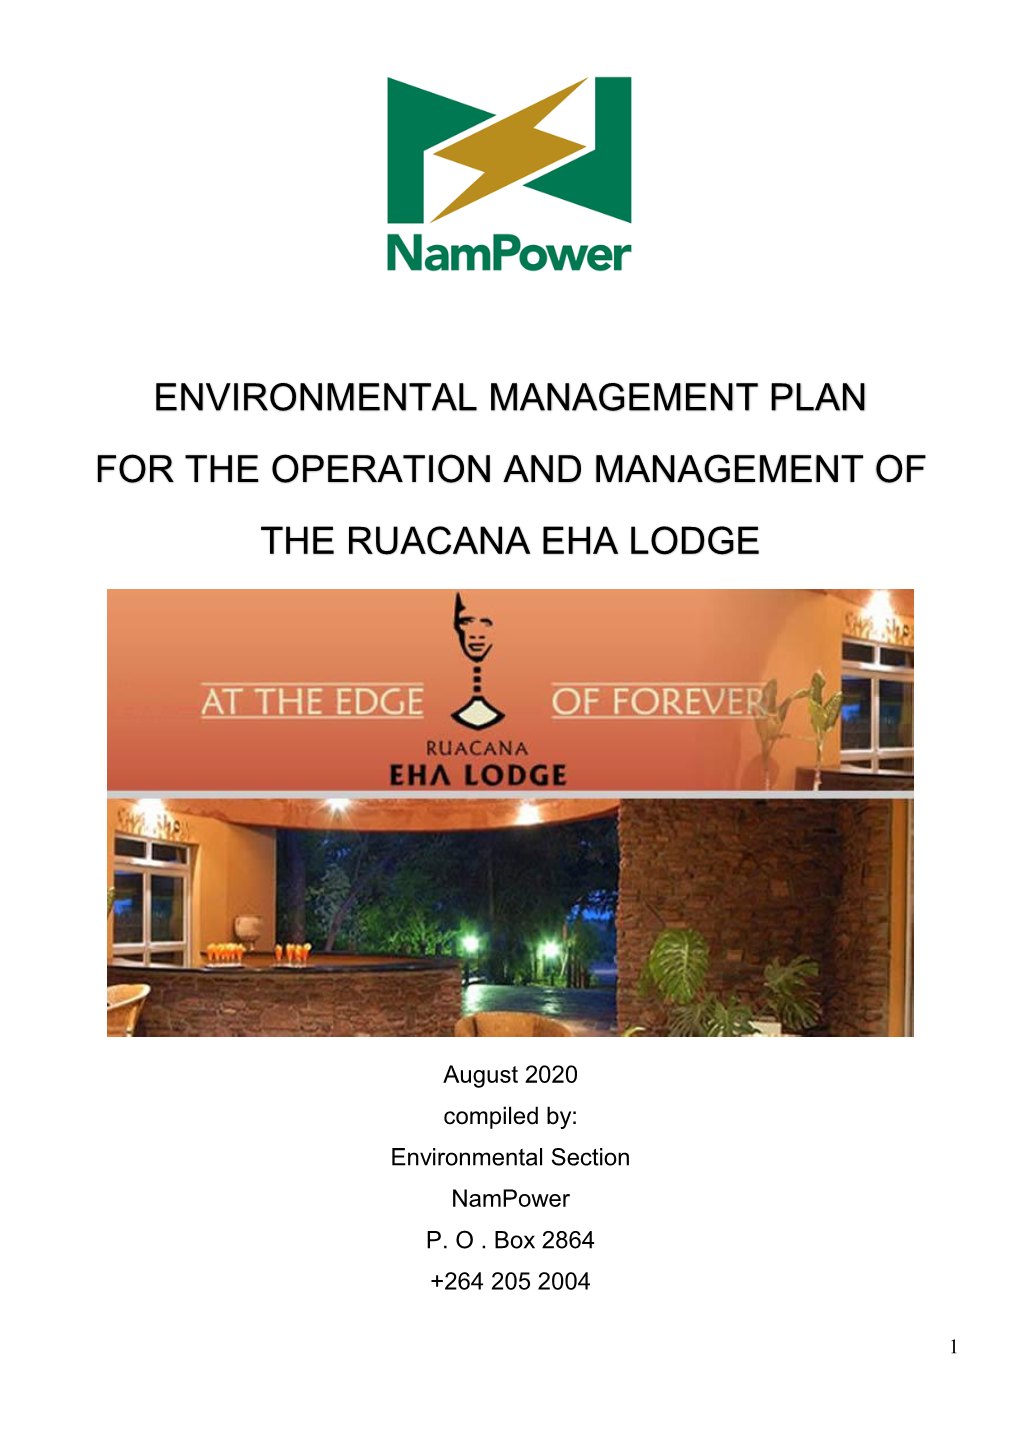 Environmental Management Plan for the Operation and Management of the Ruacana Eha Lodge